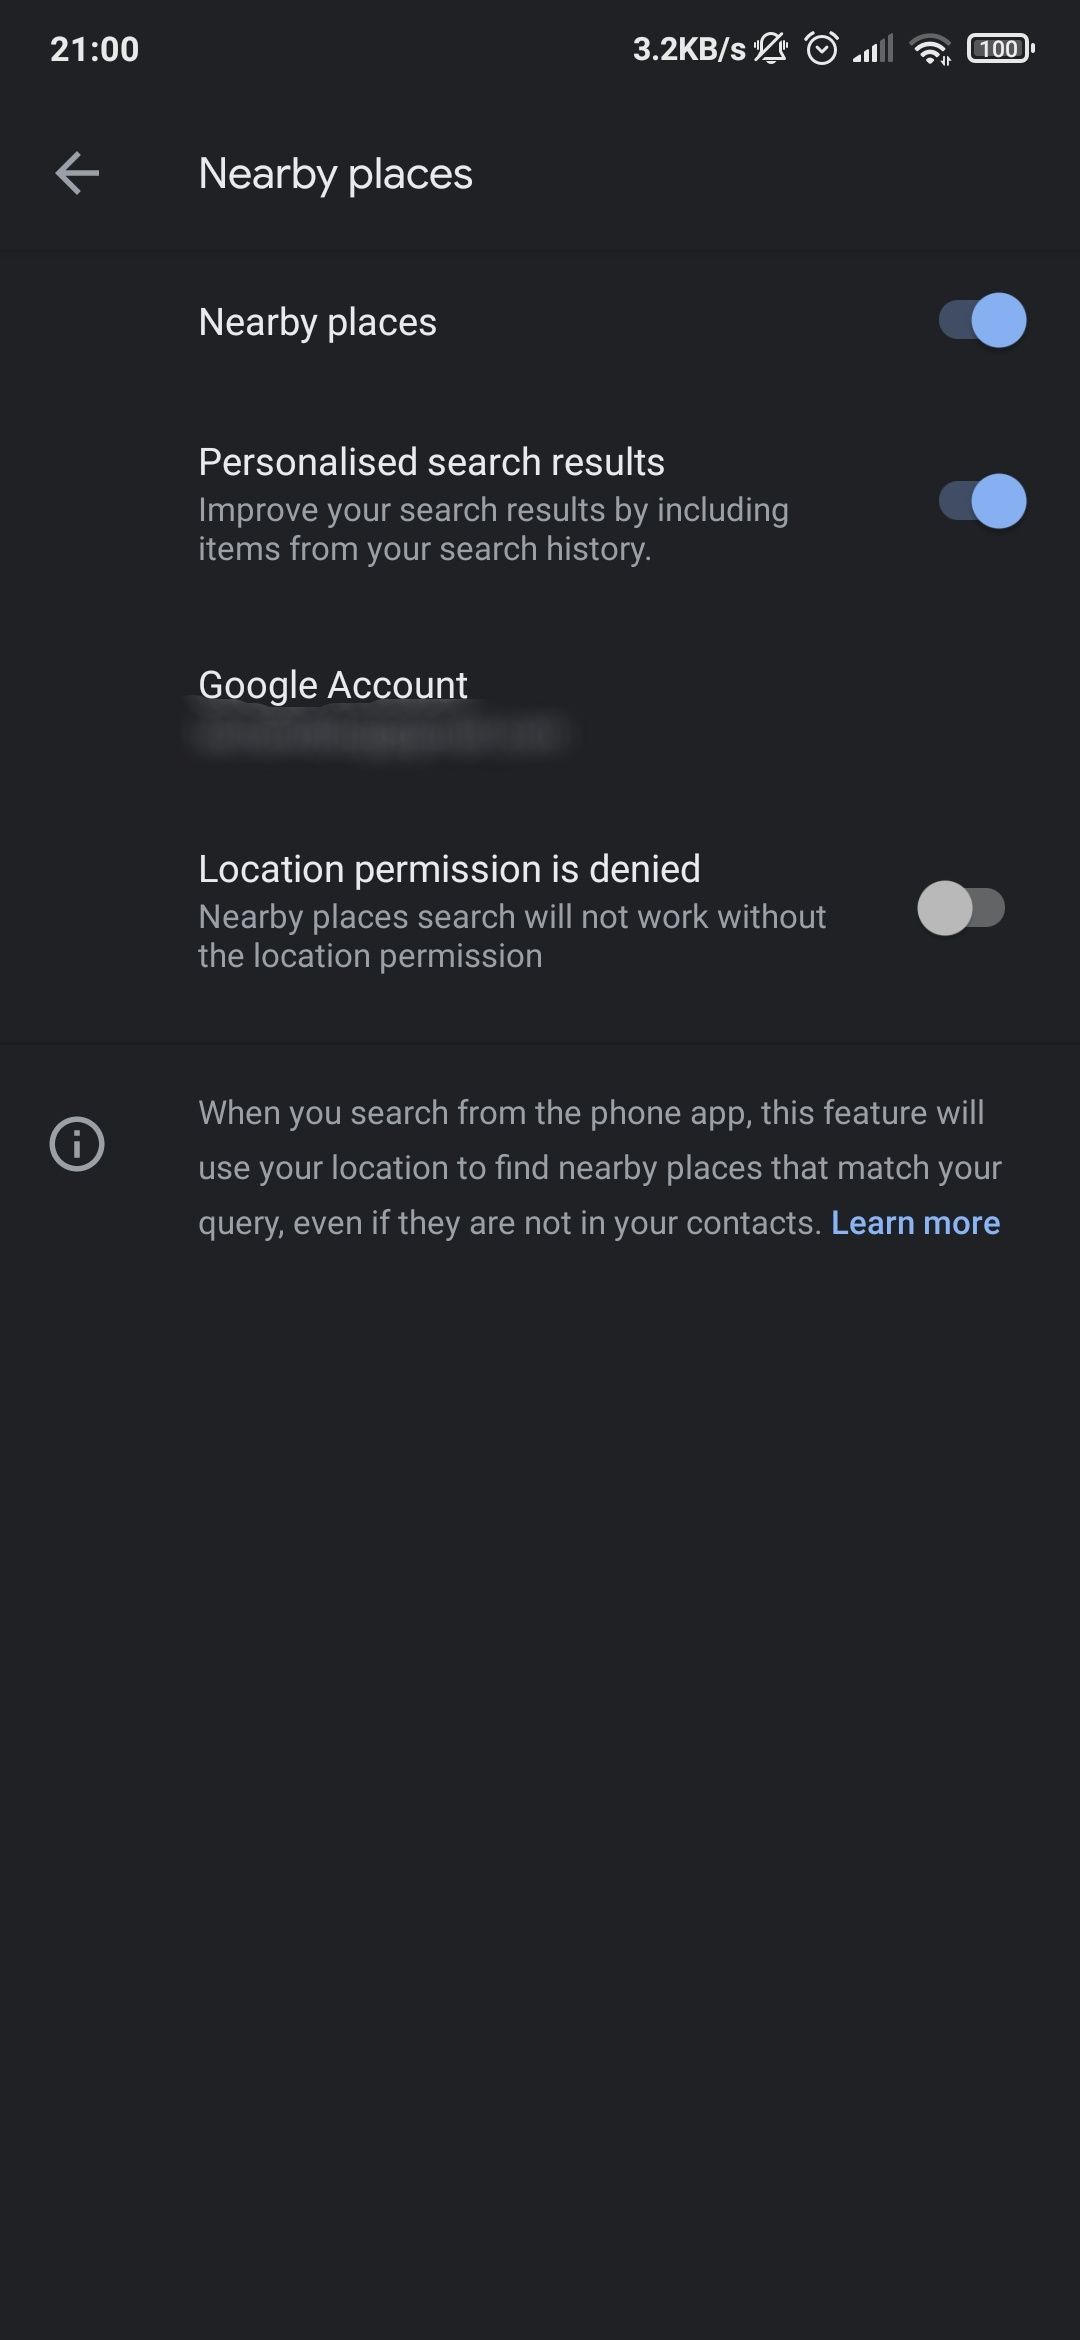 Nearby places settings in Google phone app